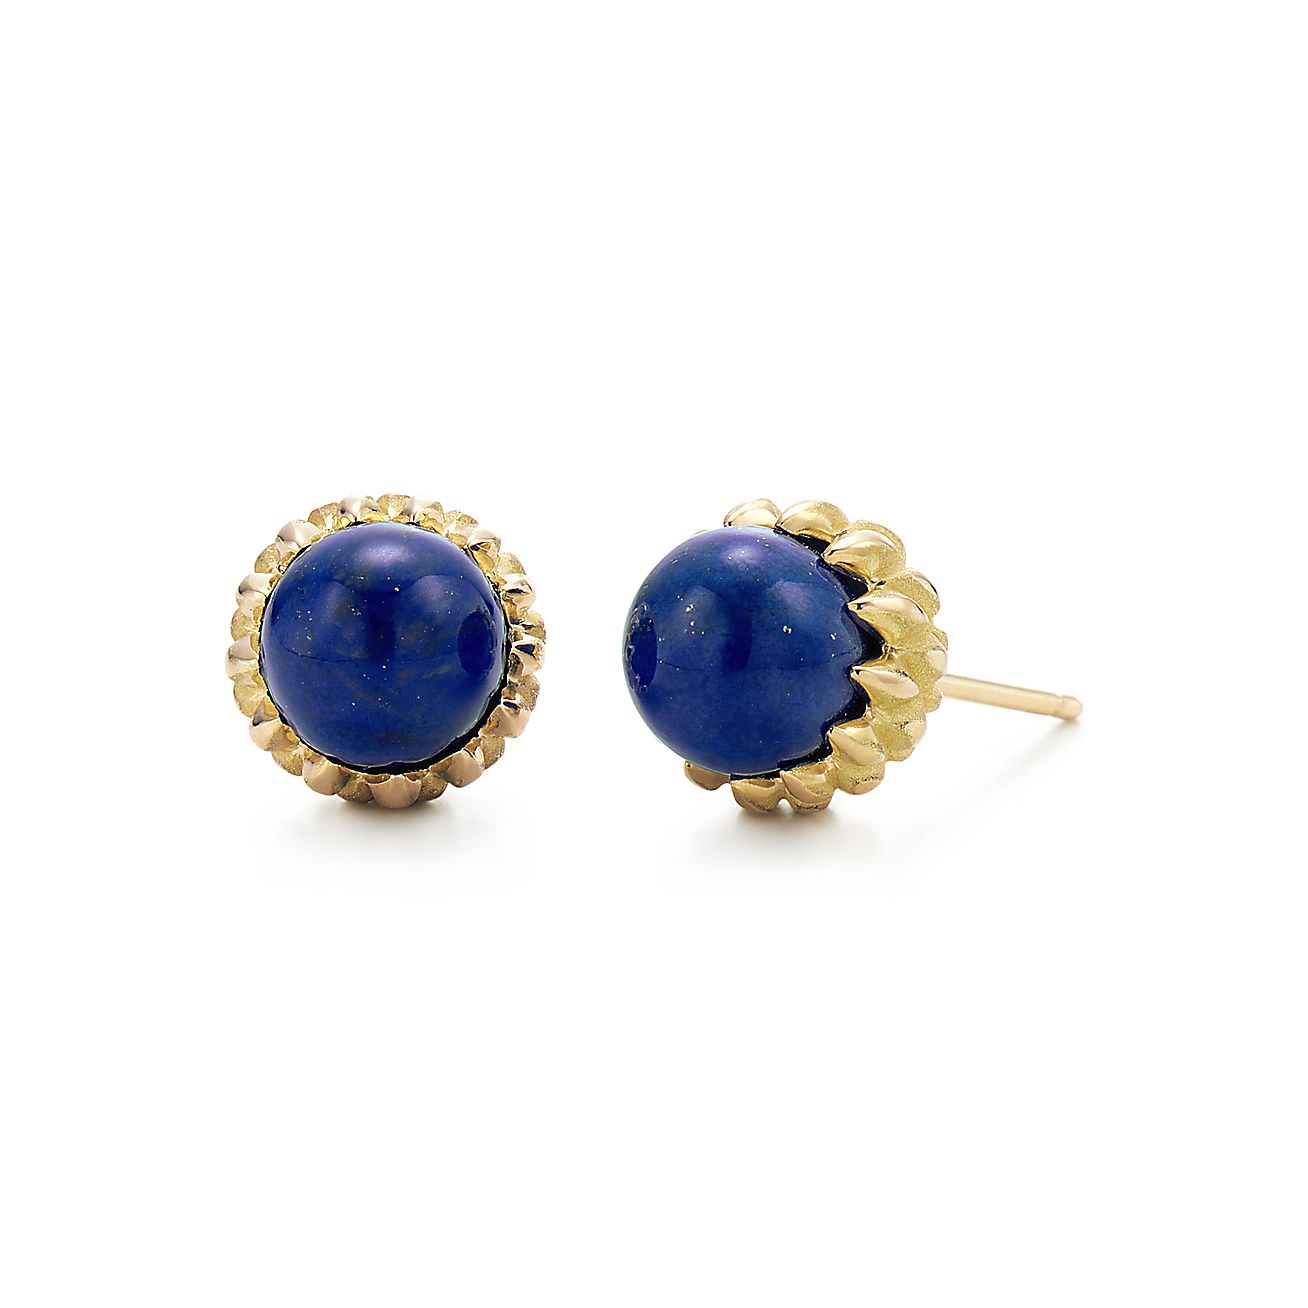 Tiffany & Co. Schlumberger® Acorn earrings in 18k gold with lapis ...